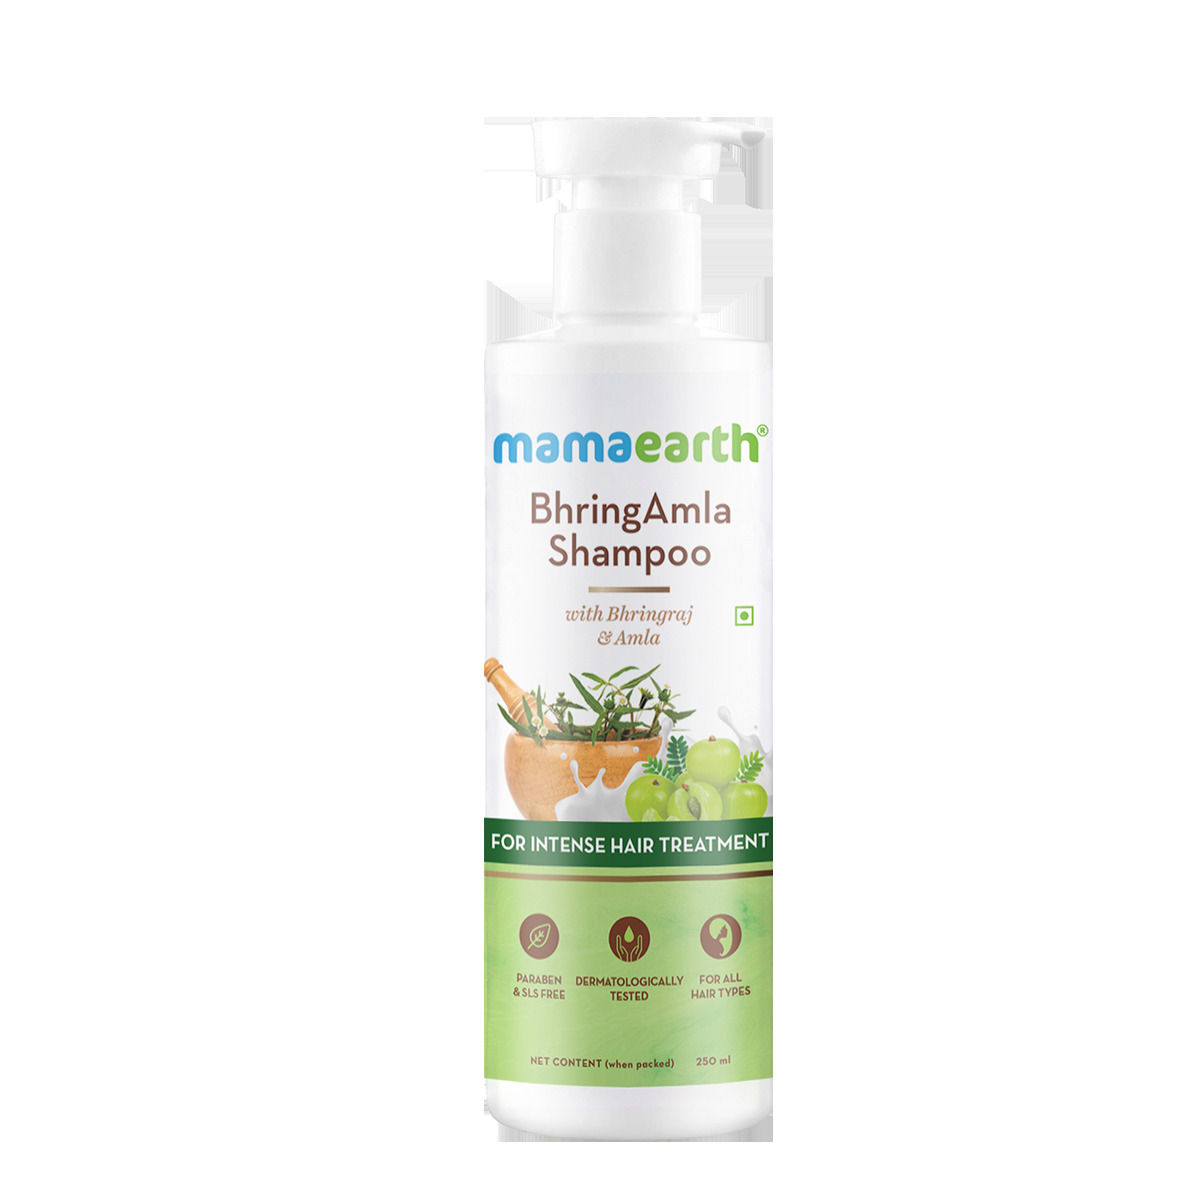 Mamaearth Bhring Amla Shampoo, 250 ml Price, Uses, Side Effects,  Composition - Apollo Pharmacy